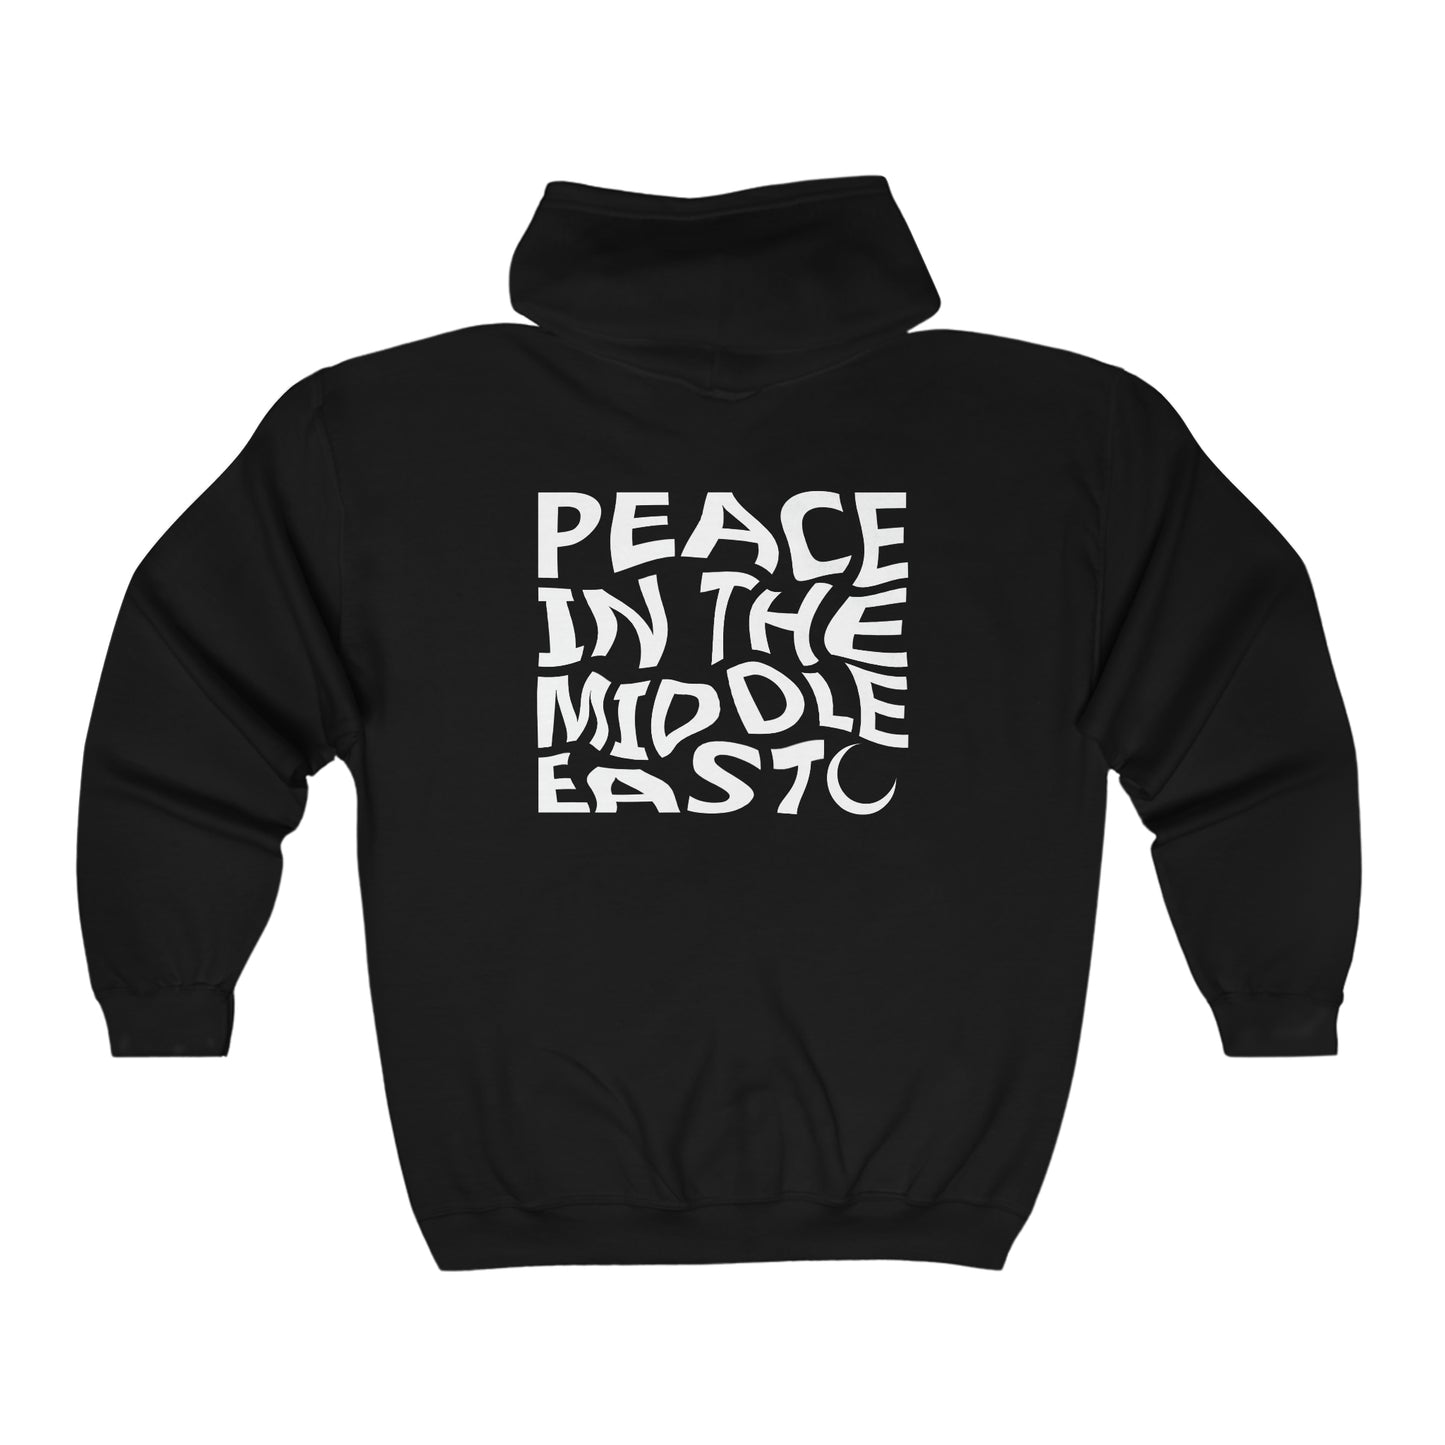 PEACE IN THE MIDDLE EAST ZIP-UP